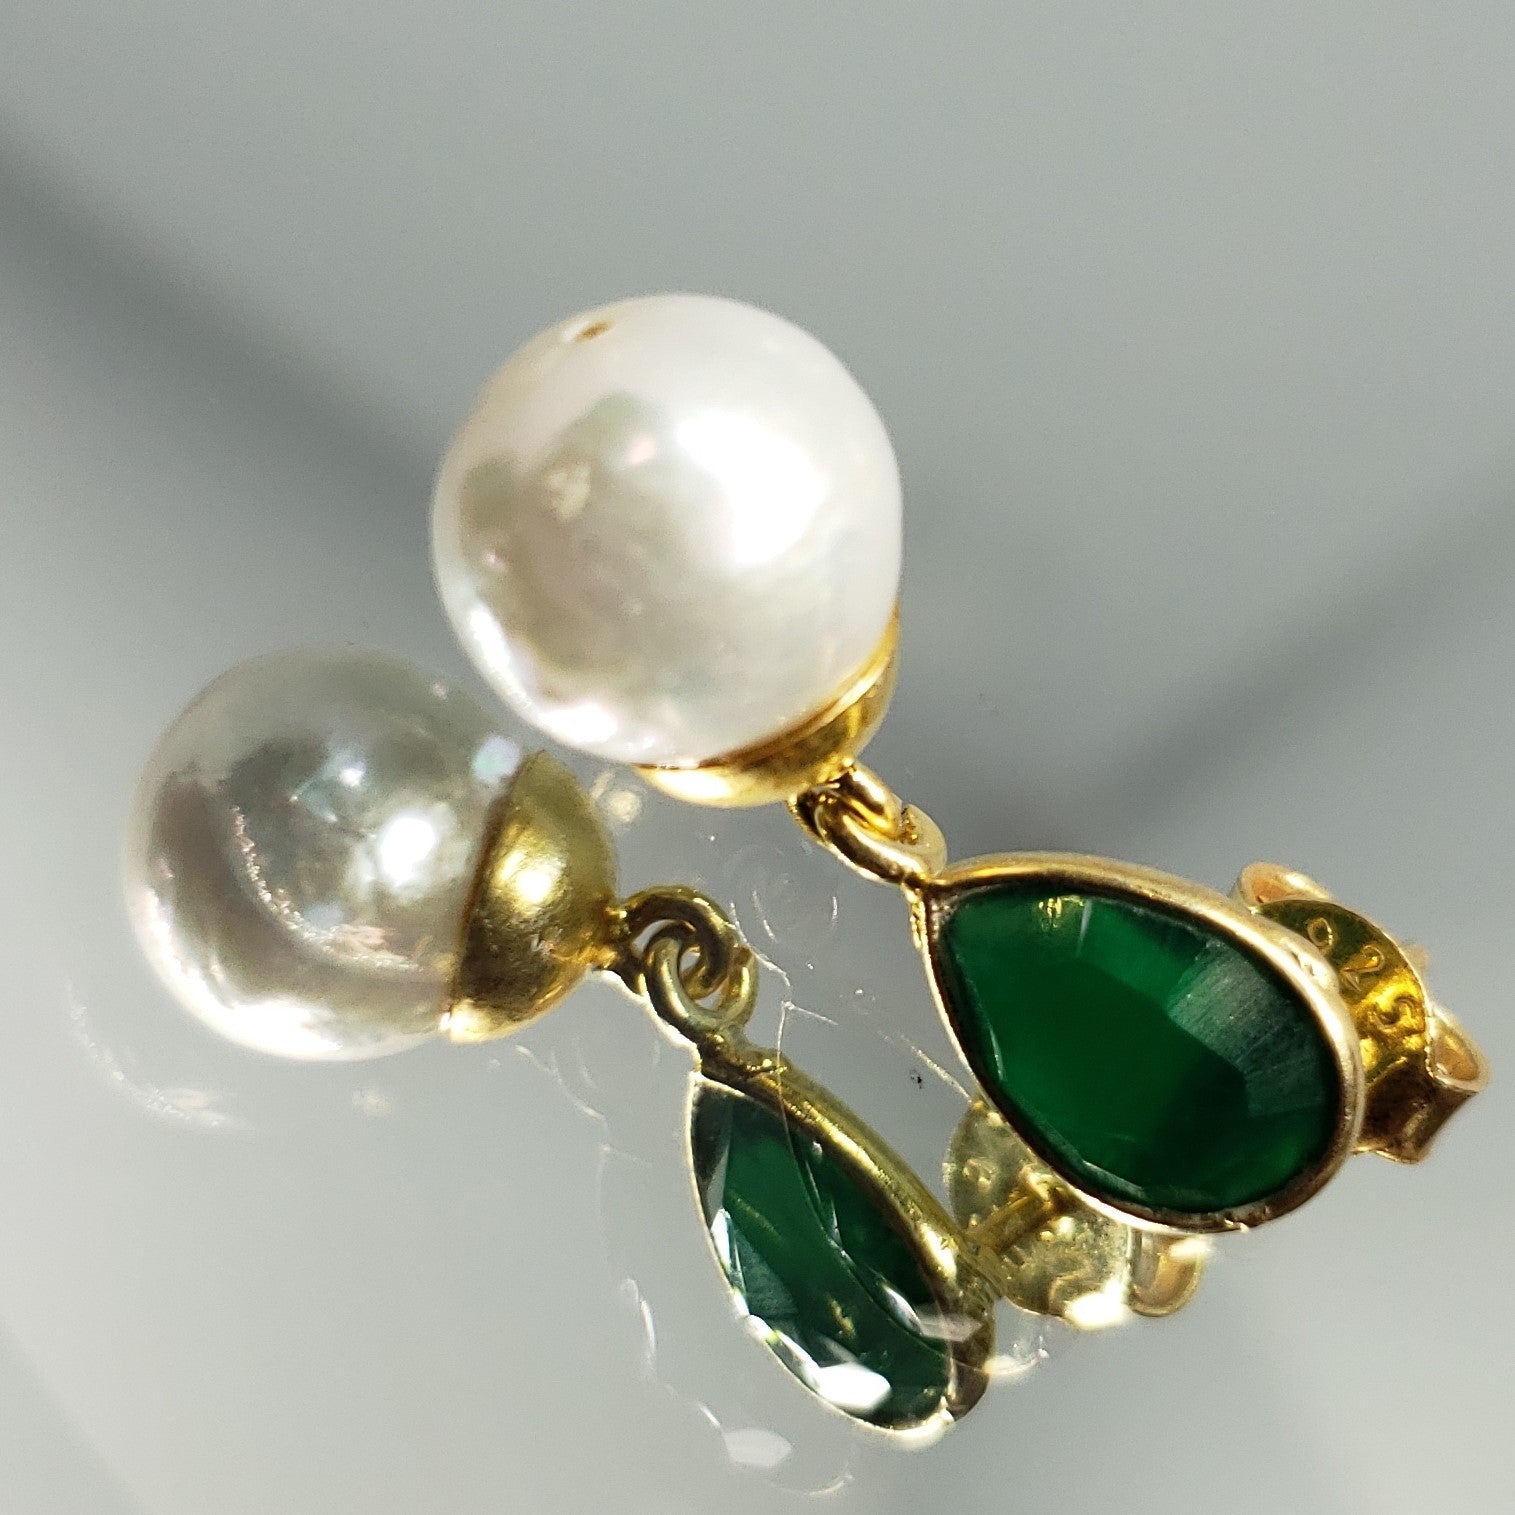 Exquisite Freshwater Pearl & Green Onyx 14K YG Over Sterling Silver Earrings TGW 0.50 cts. - Houzz of DVA Boutique